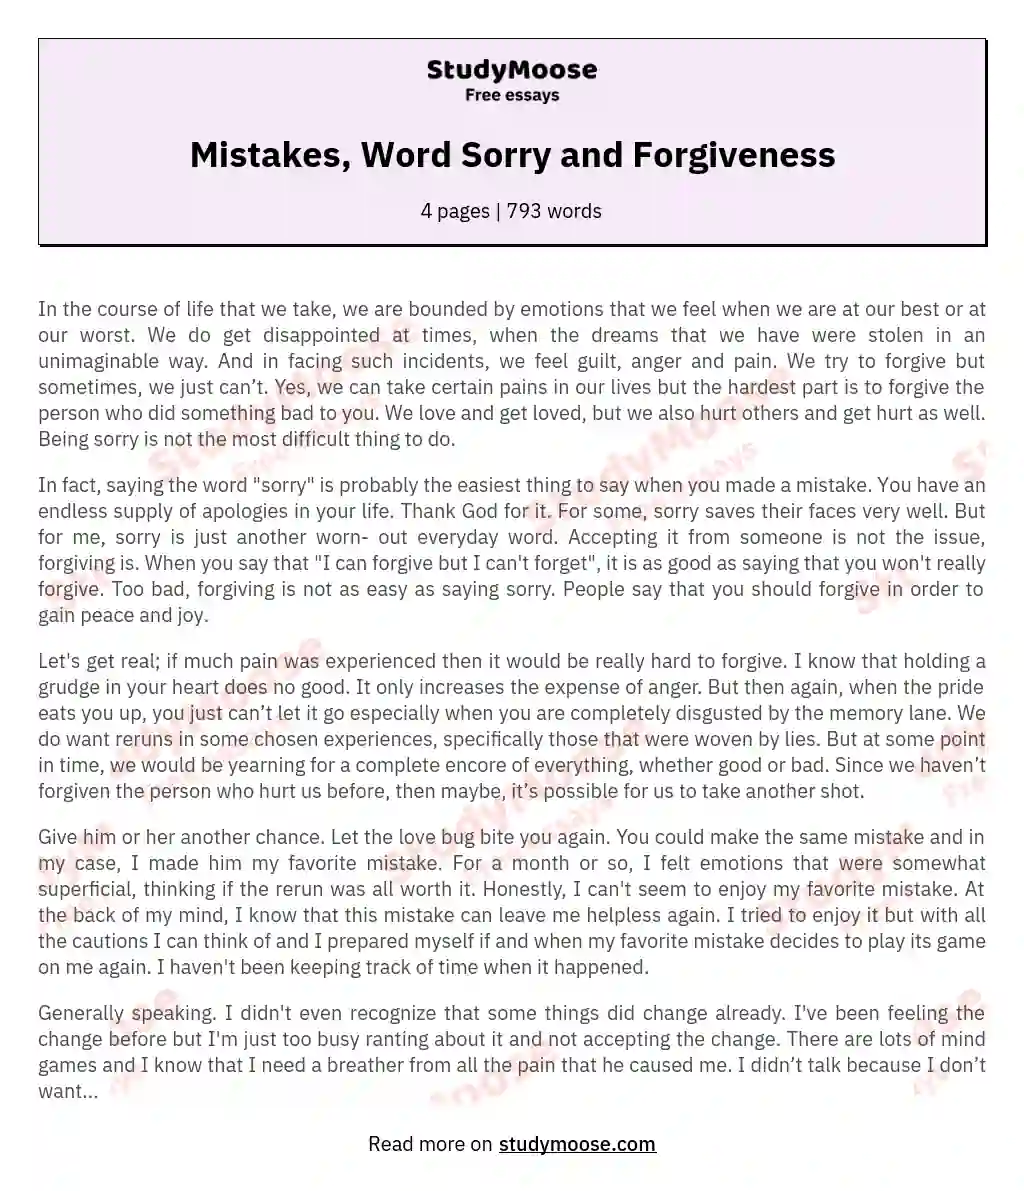 Mistakes, Word Sorry and Forgiveness